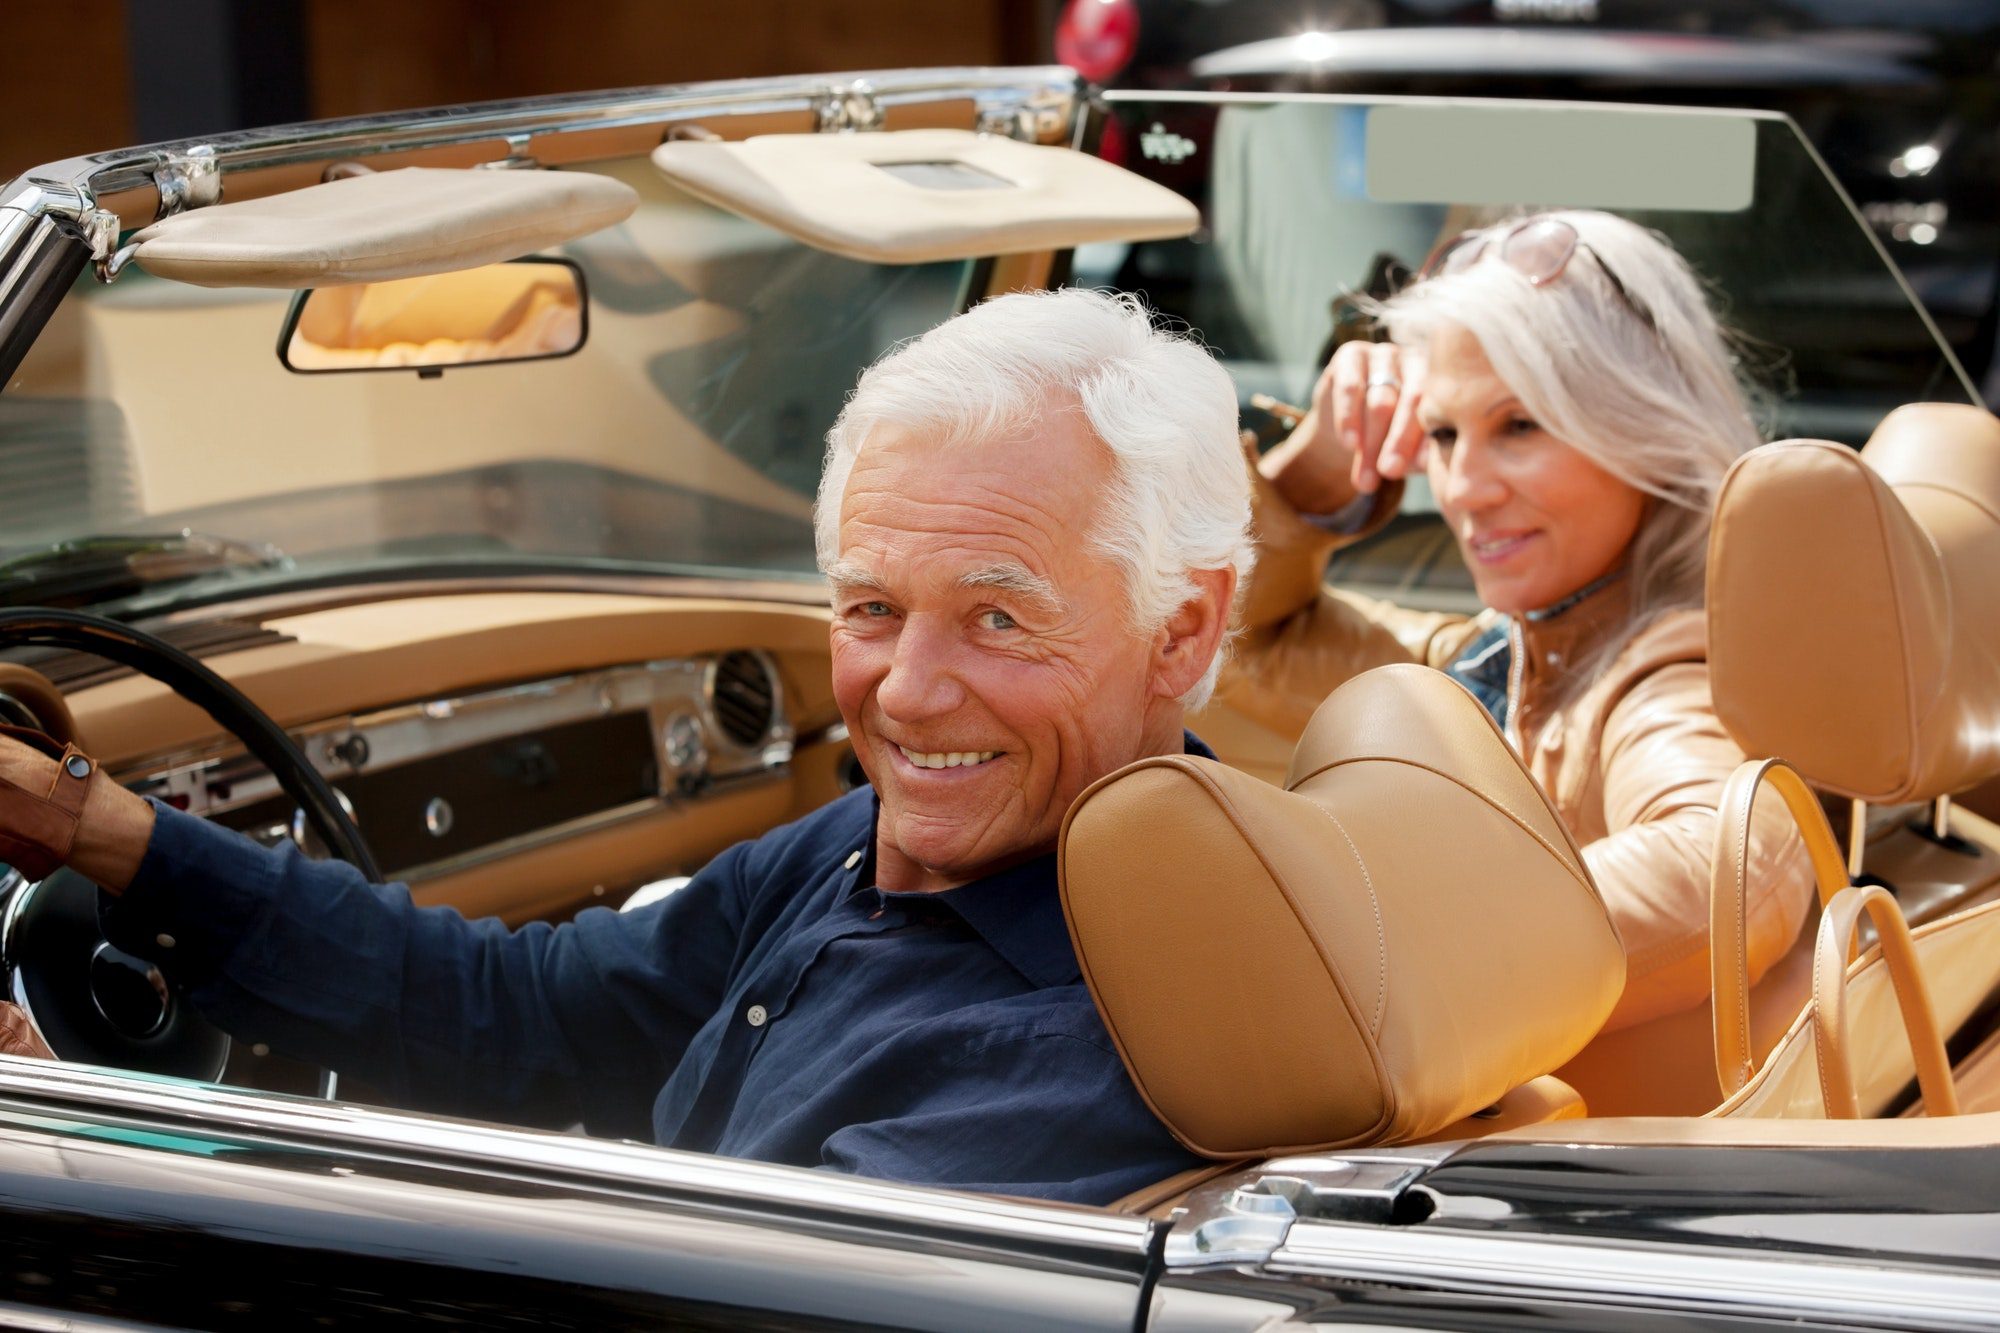 Senior couple enjoying a drive in care while they discuss the new 2022 medicare costs.